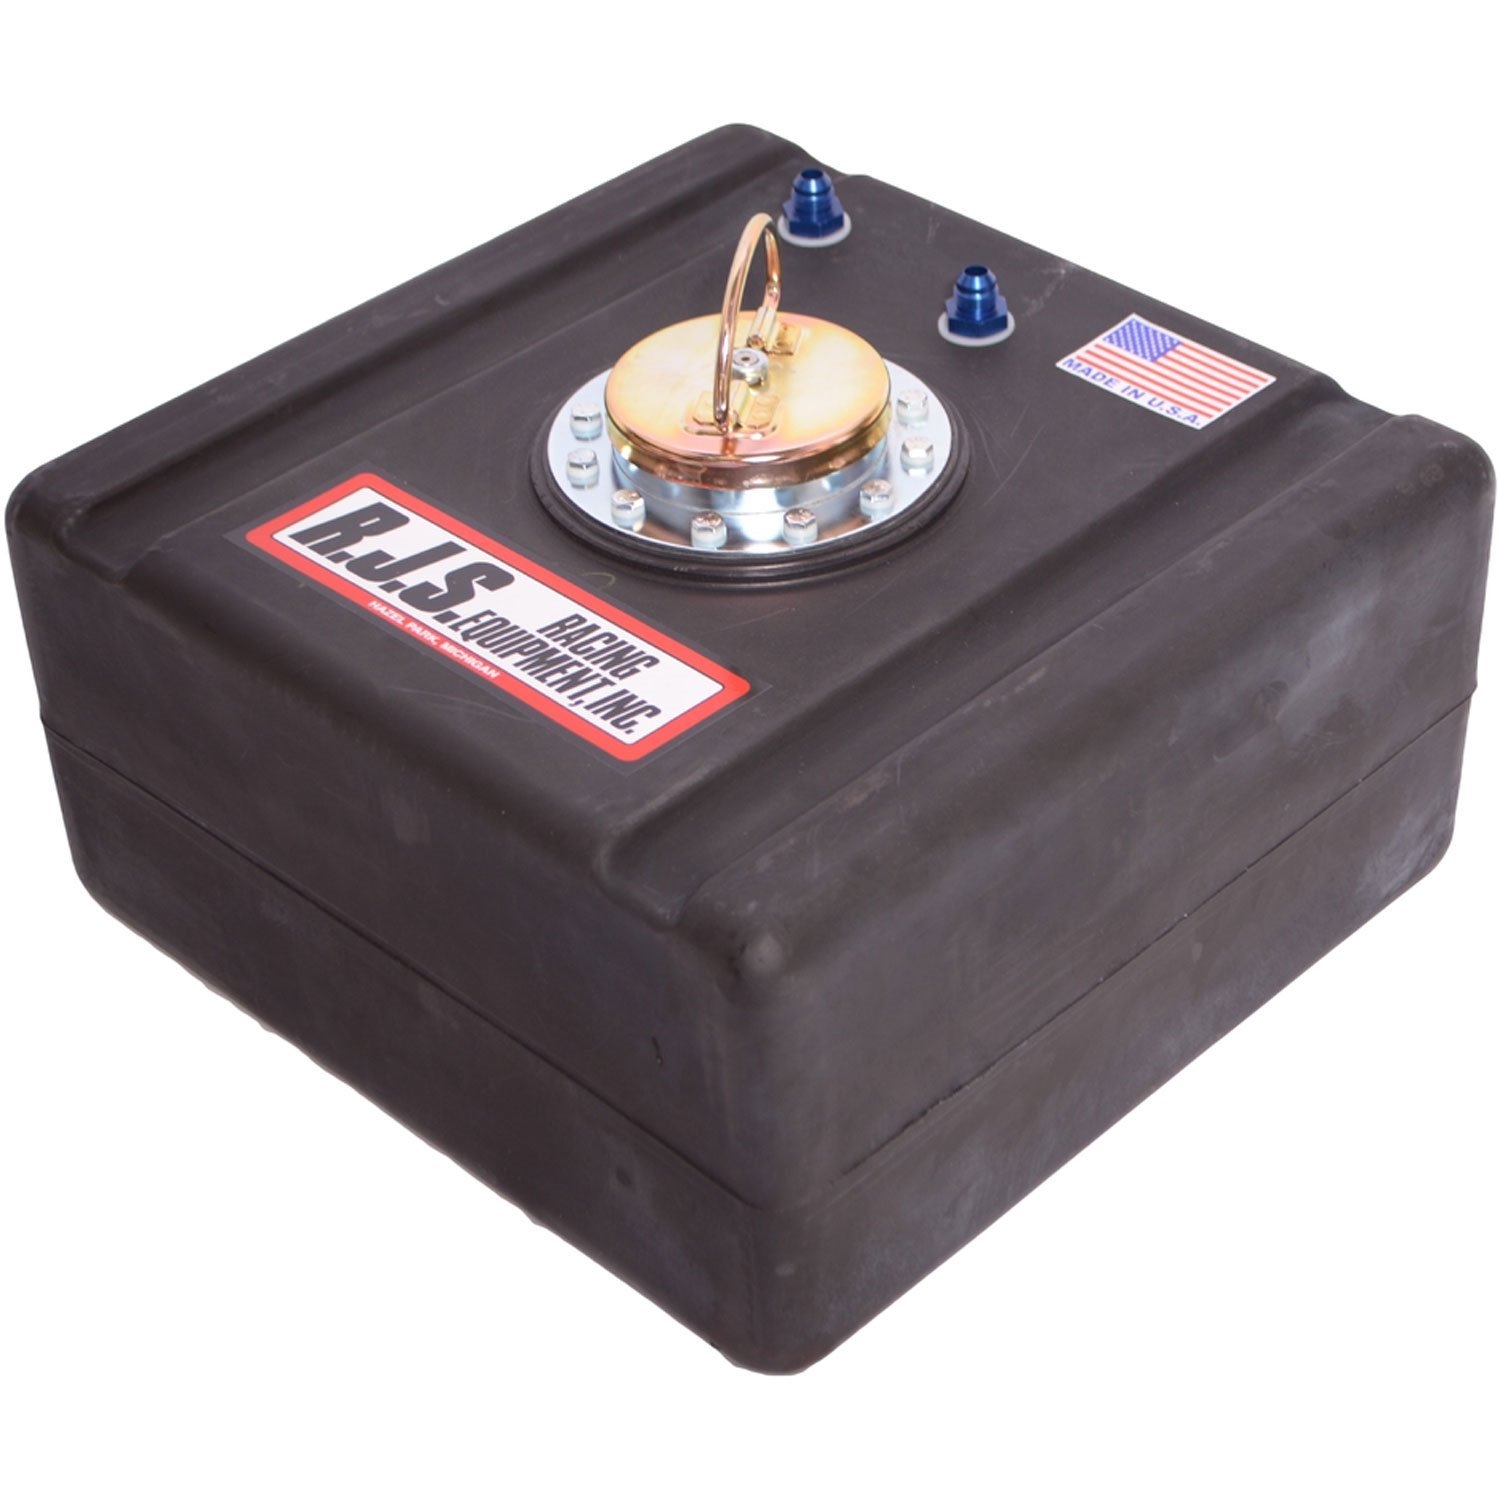 11 Gallon Economy Fuel Cell with Aircraft Style Filler Cap and Red Can